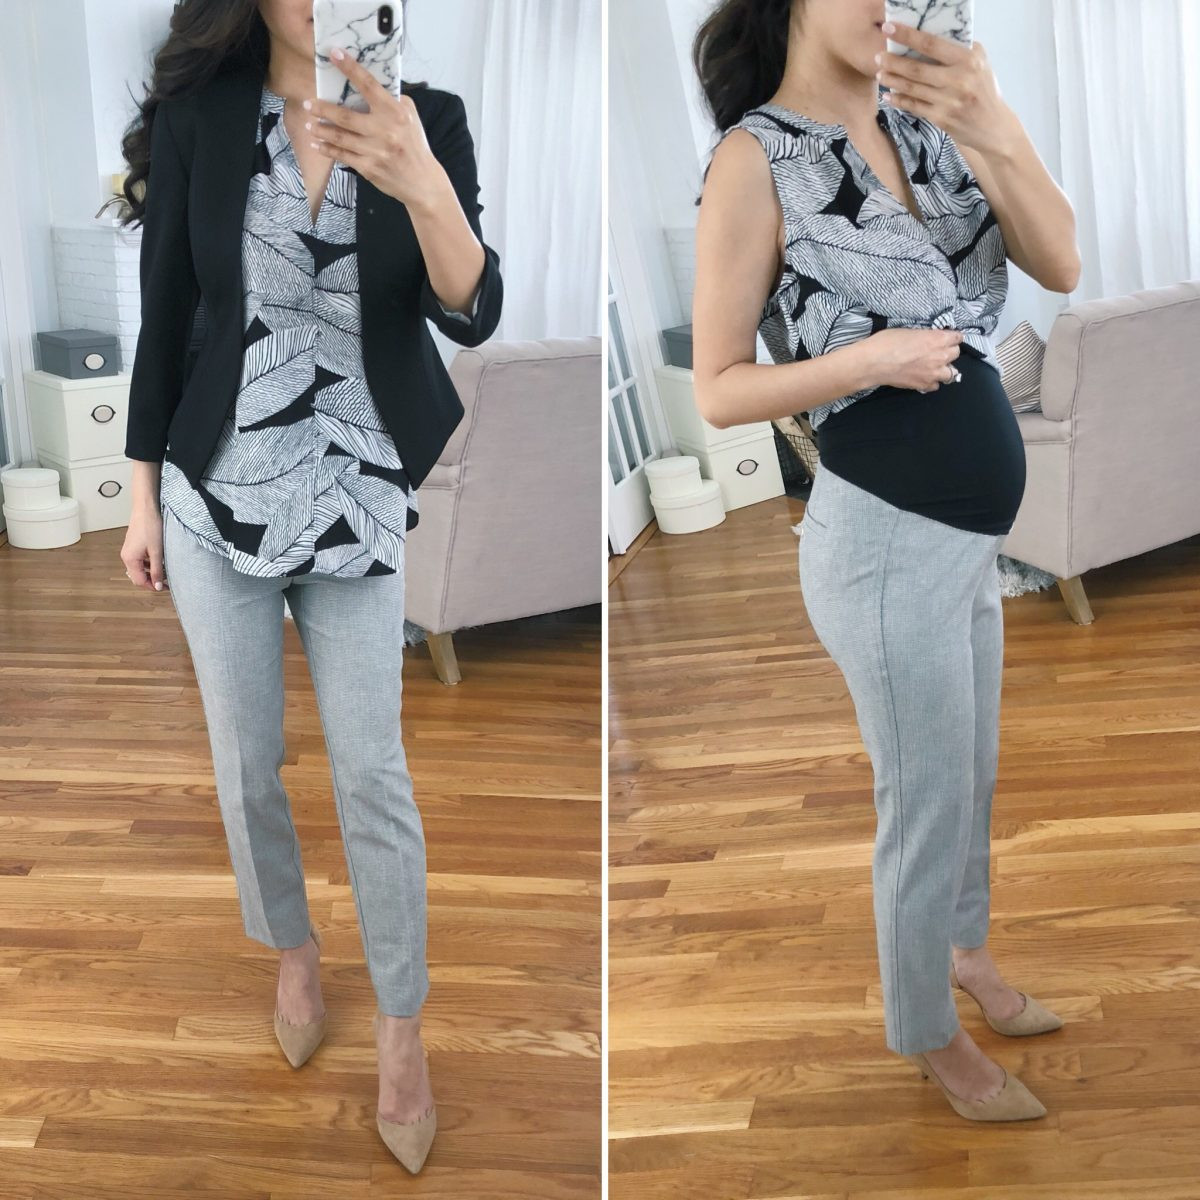 Work Work Fashion Baby
 Work outfit ideas that hide a belly